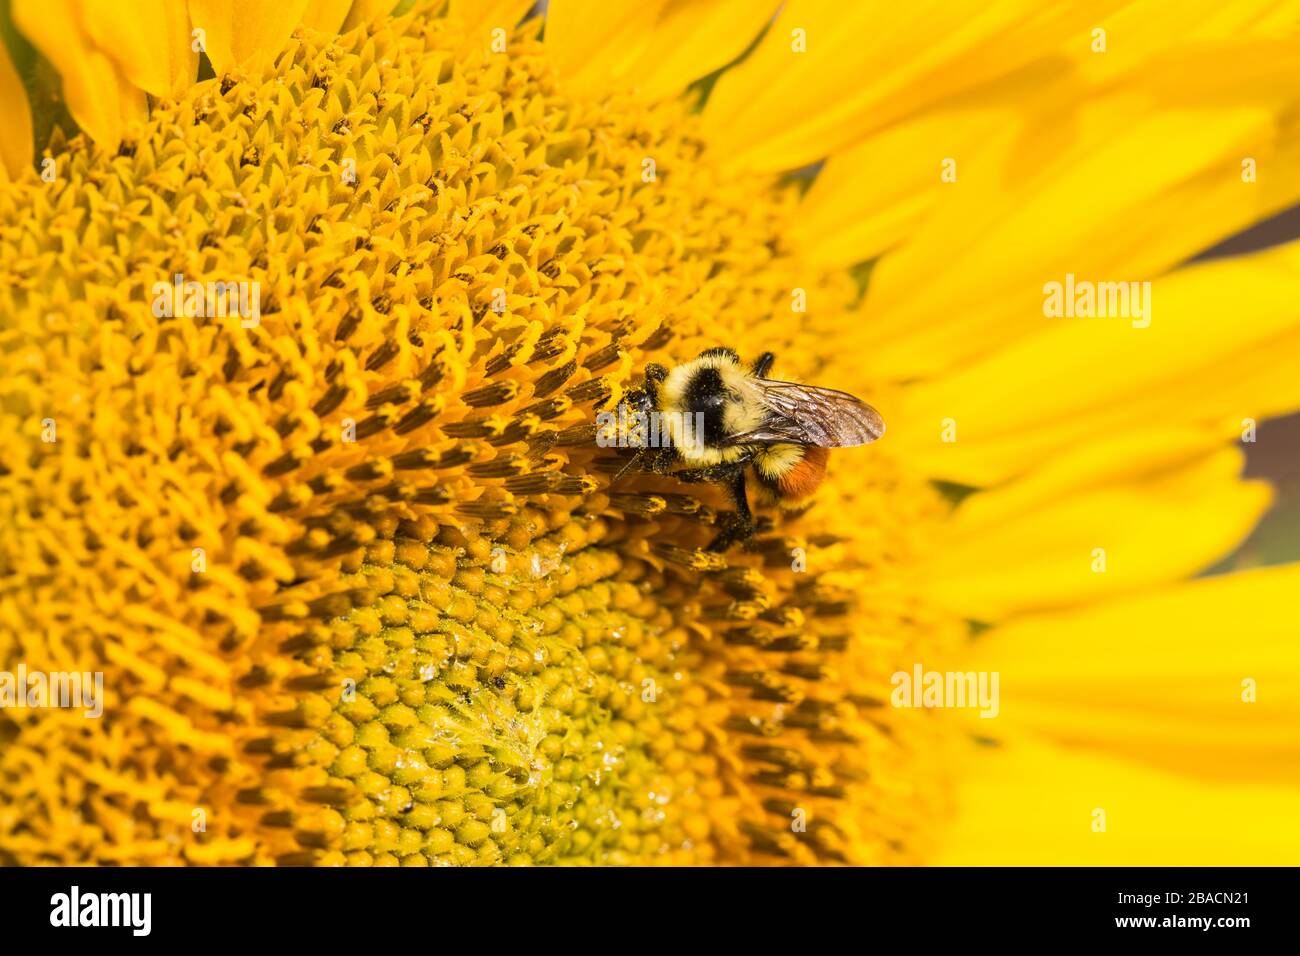 Bumblebee Pollinating a Sunflower Stock Photo